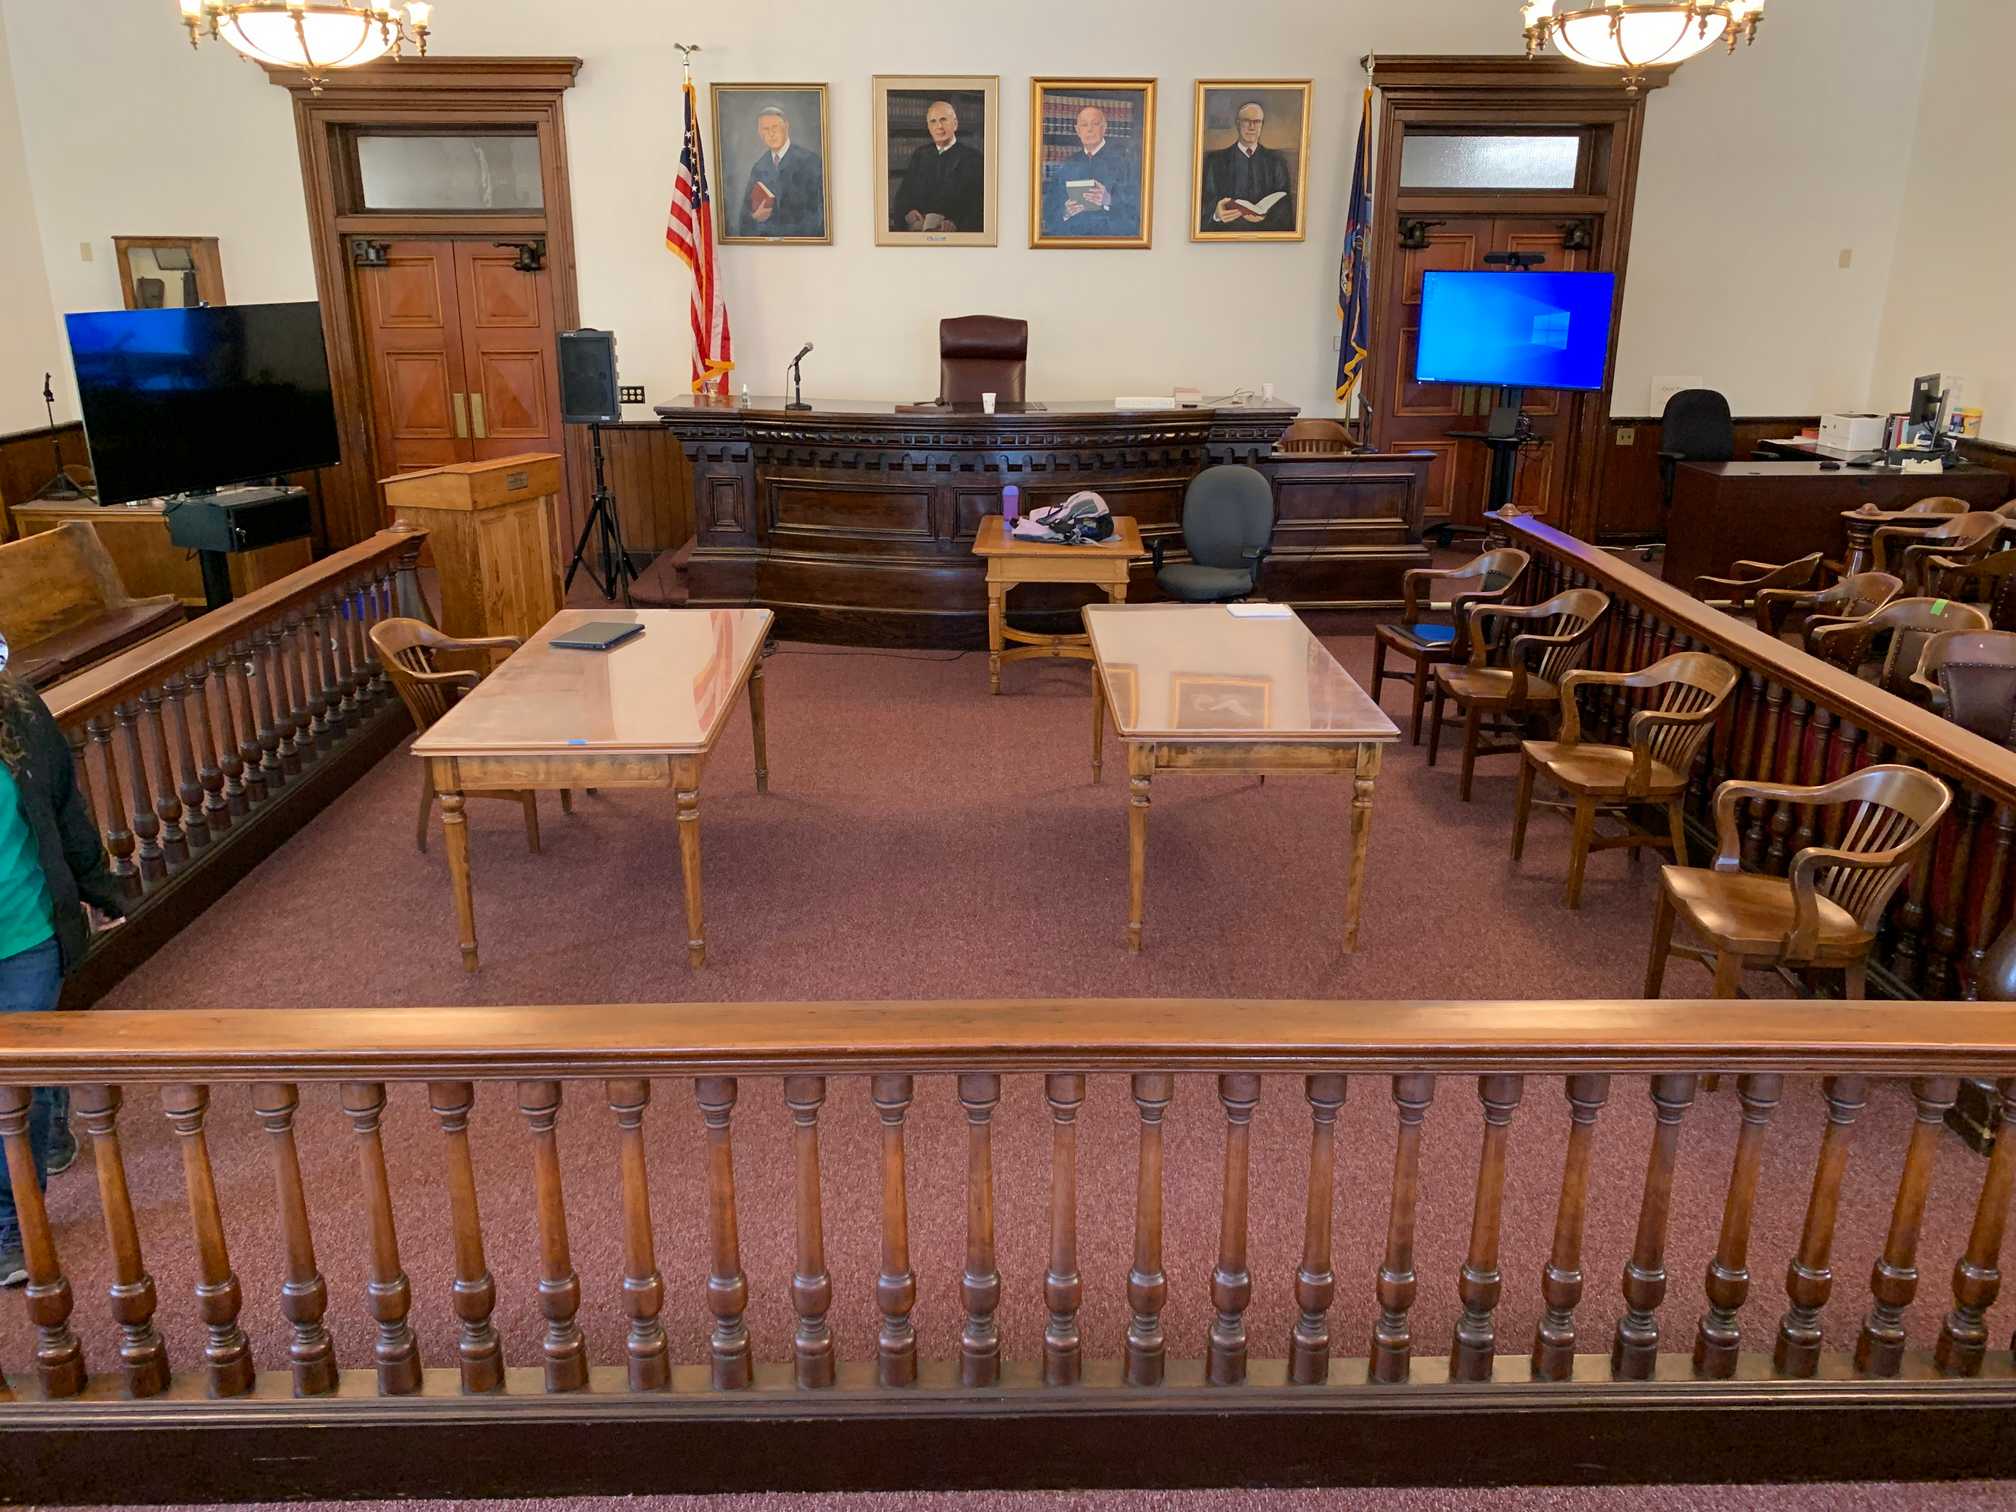 An old-fashioned courtroom with wooden furniture has been modernized with two large TV screens and CPUs on rollable stands (one computer is connected to a videoconferencing camera), a speaker, and microphones. The picture is taken from the viewpoint of the gallery, facing the judge's bench.